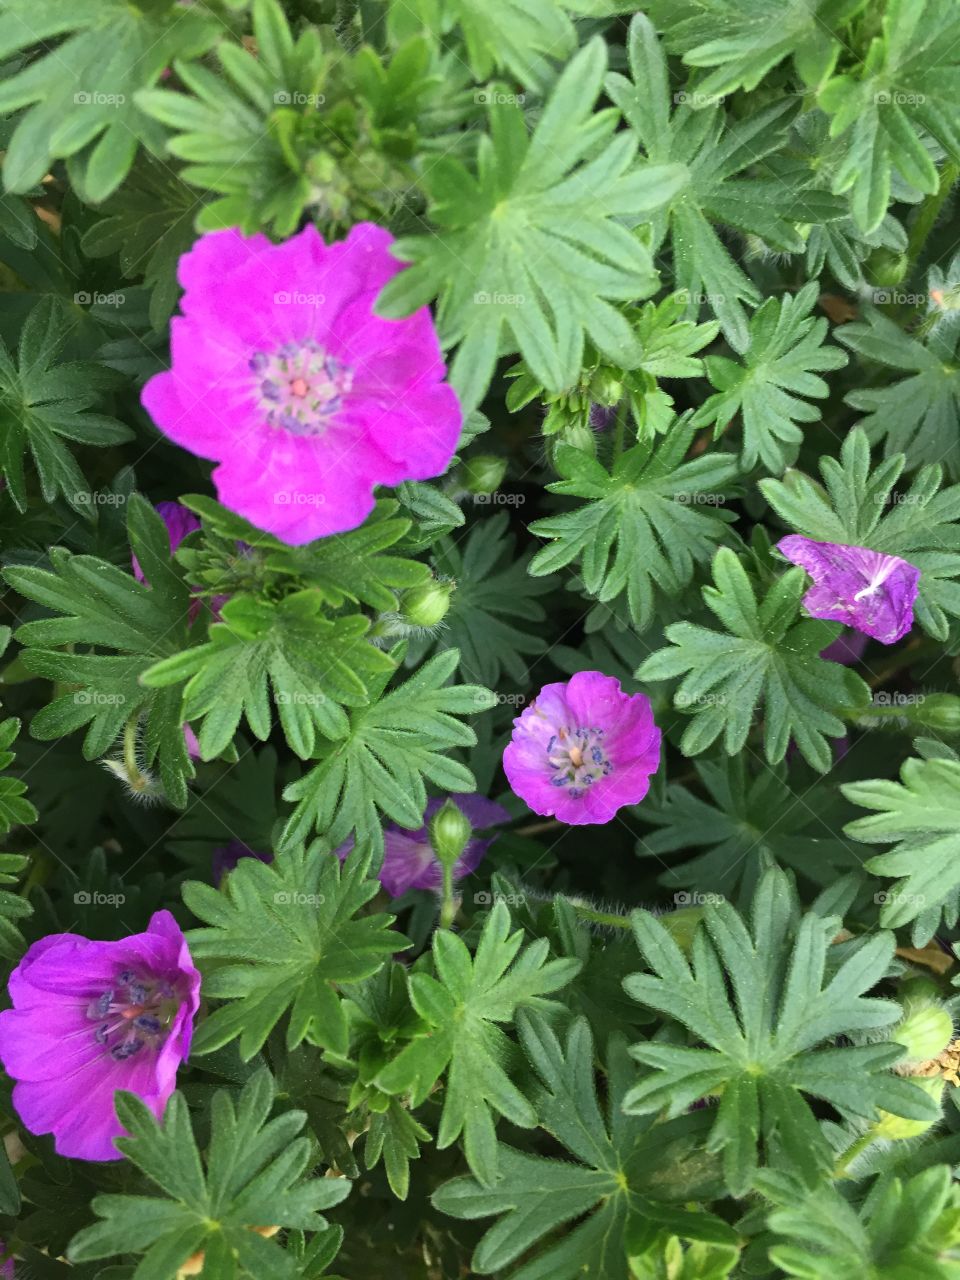 Plant with purple flowers in green leaves.